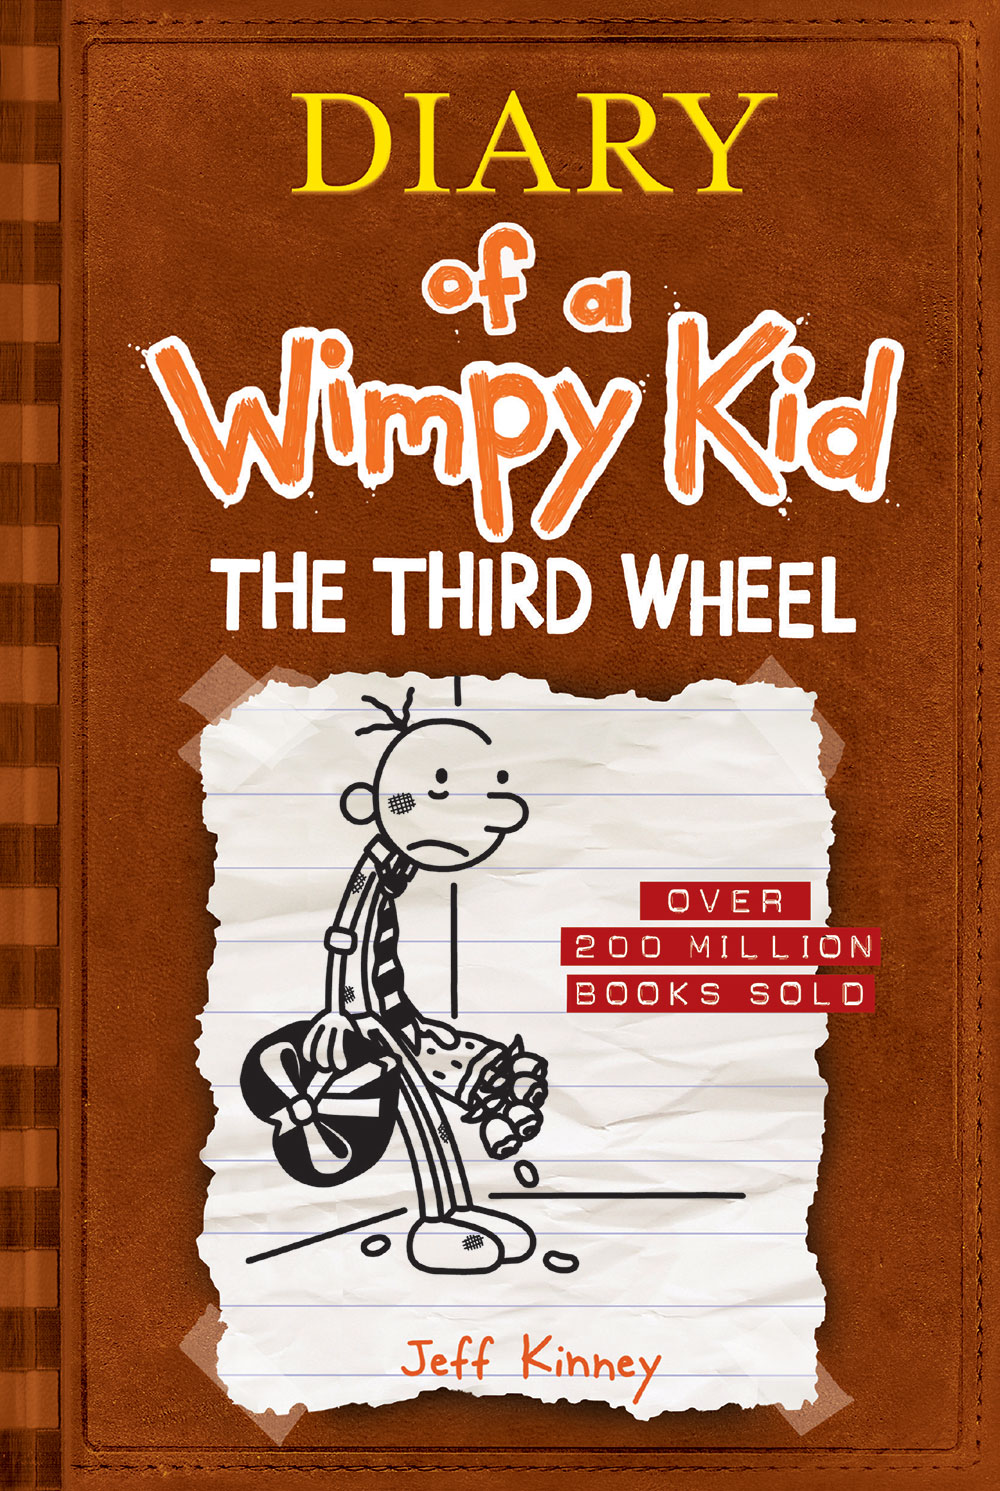 Diary of a Wimpy Kid T.07 - The Third Wheel  | 9-12 years old